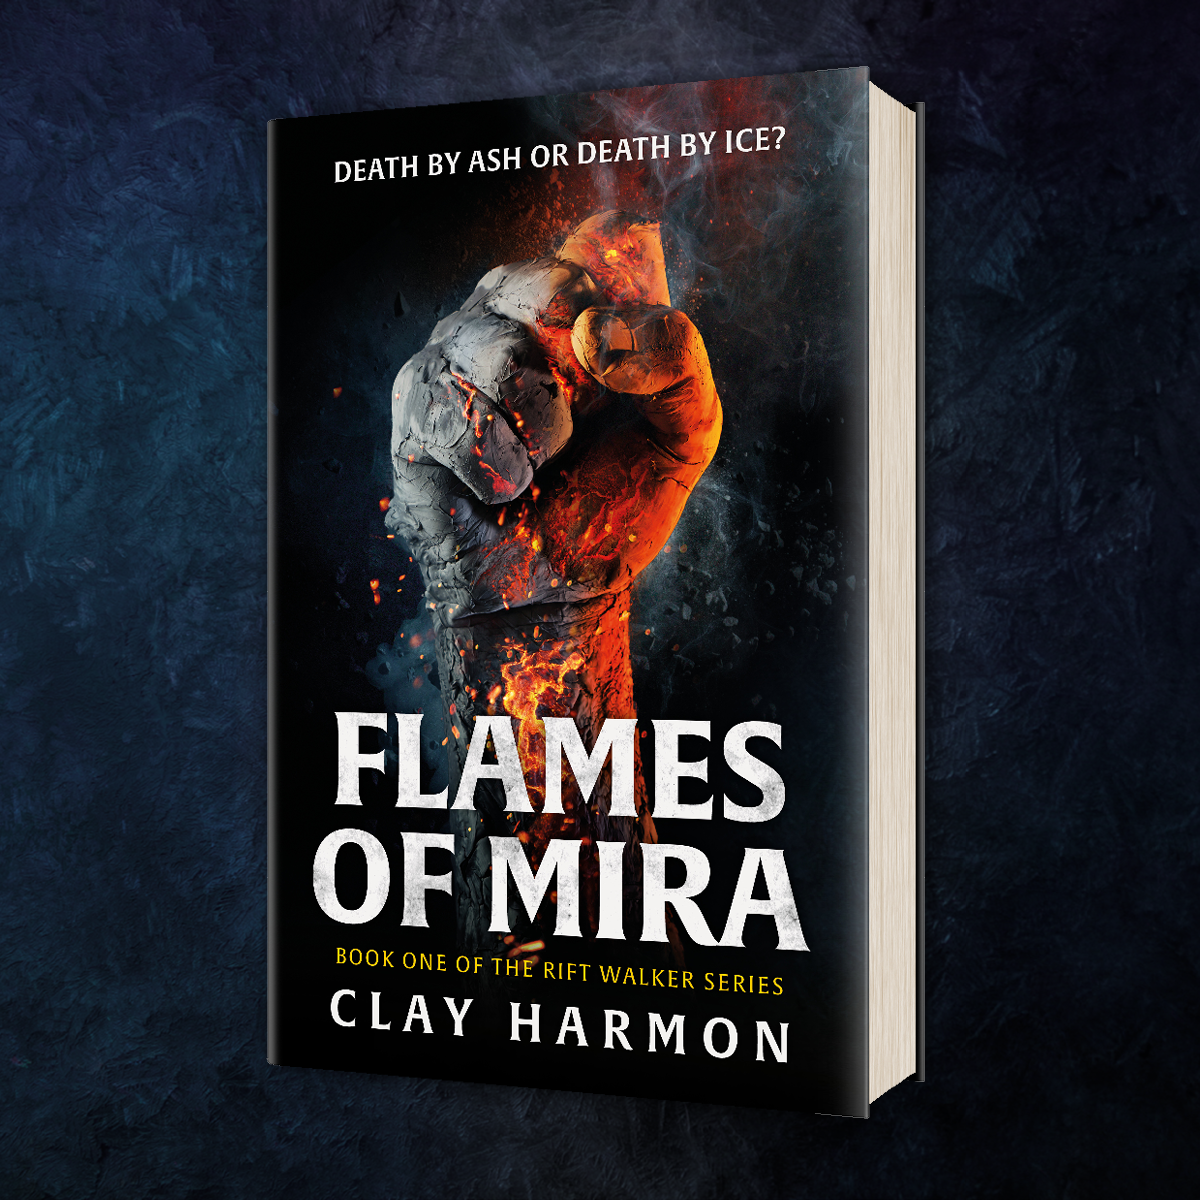 OUT NOW: Flames of Mira by Clay Harmon